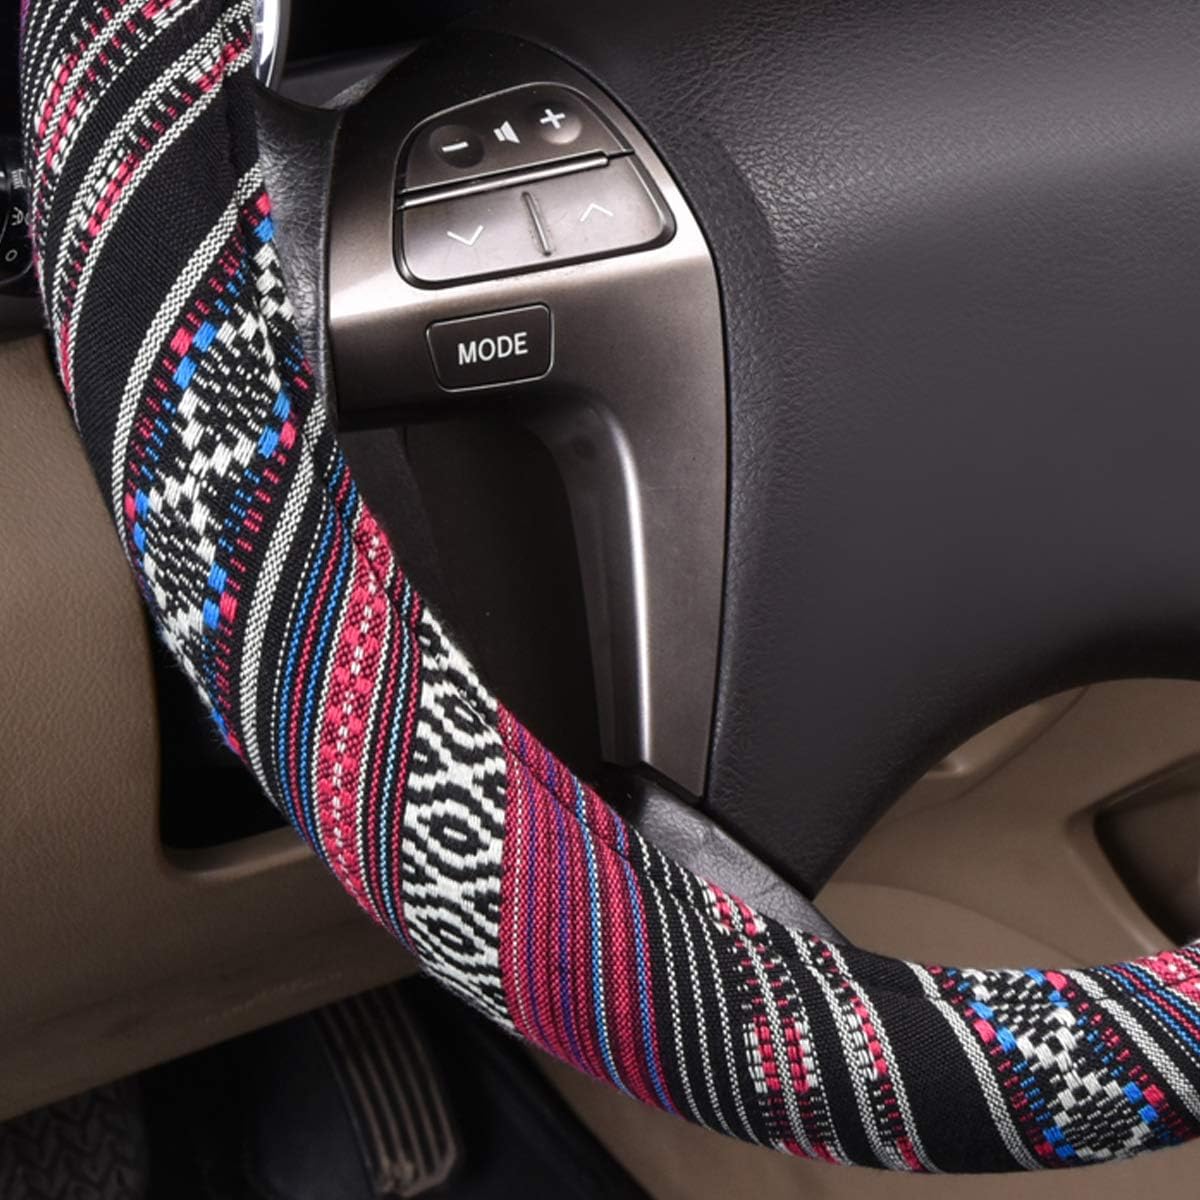 CAR PASS Flax Cloth Pretty Ethnic Style Universal Fit Steering Wheel Cover, Fit for Suvs,Sedans,Cars,Trucks (Black and White)